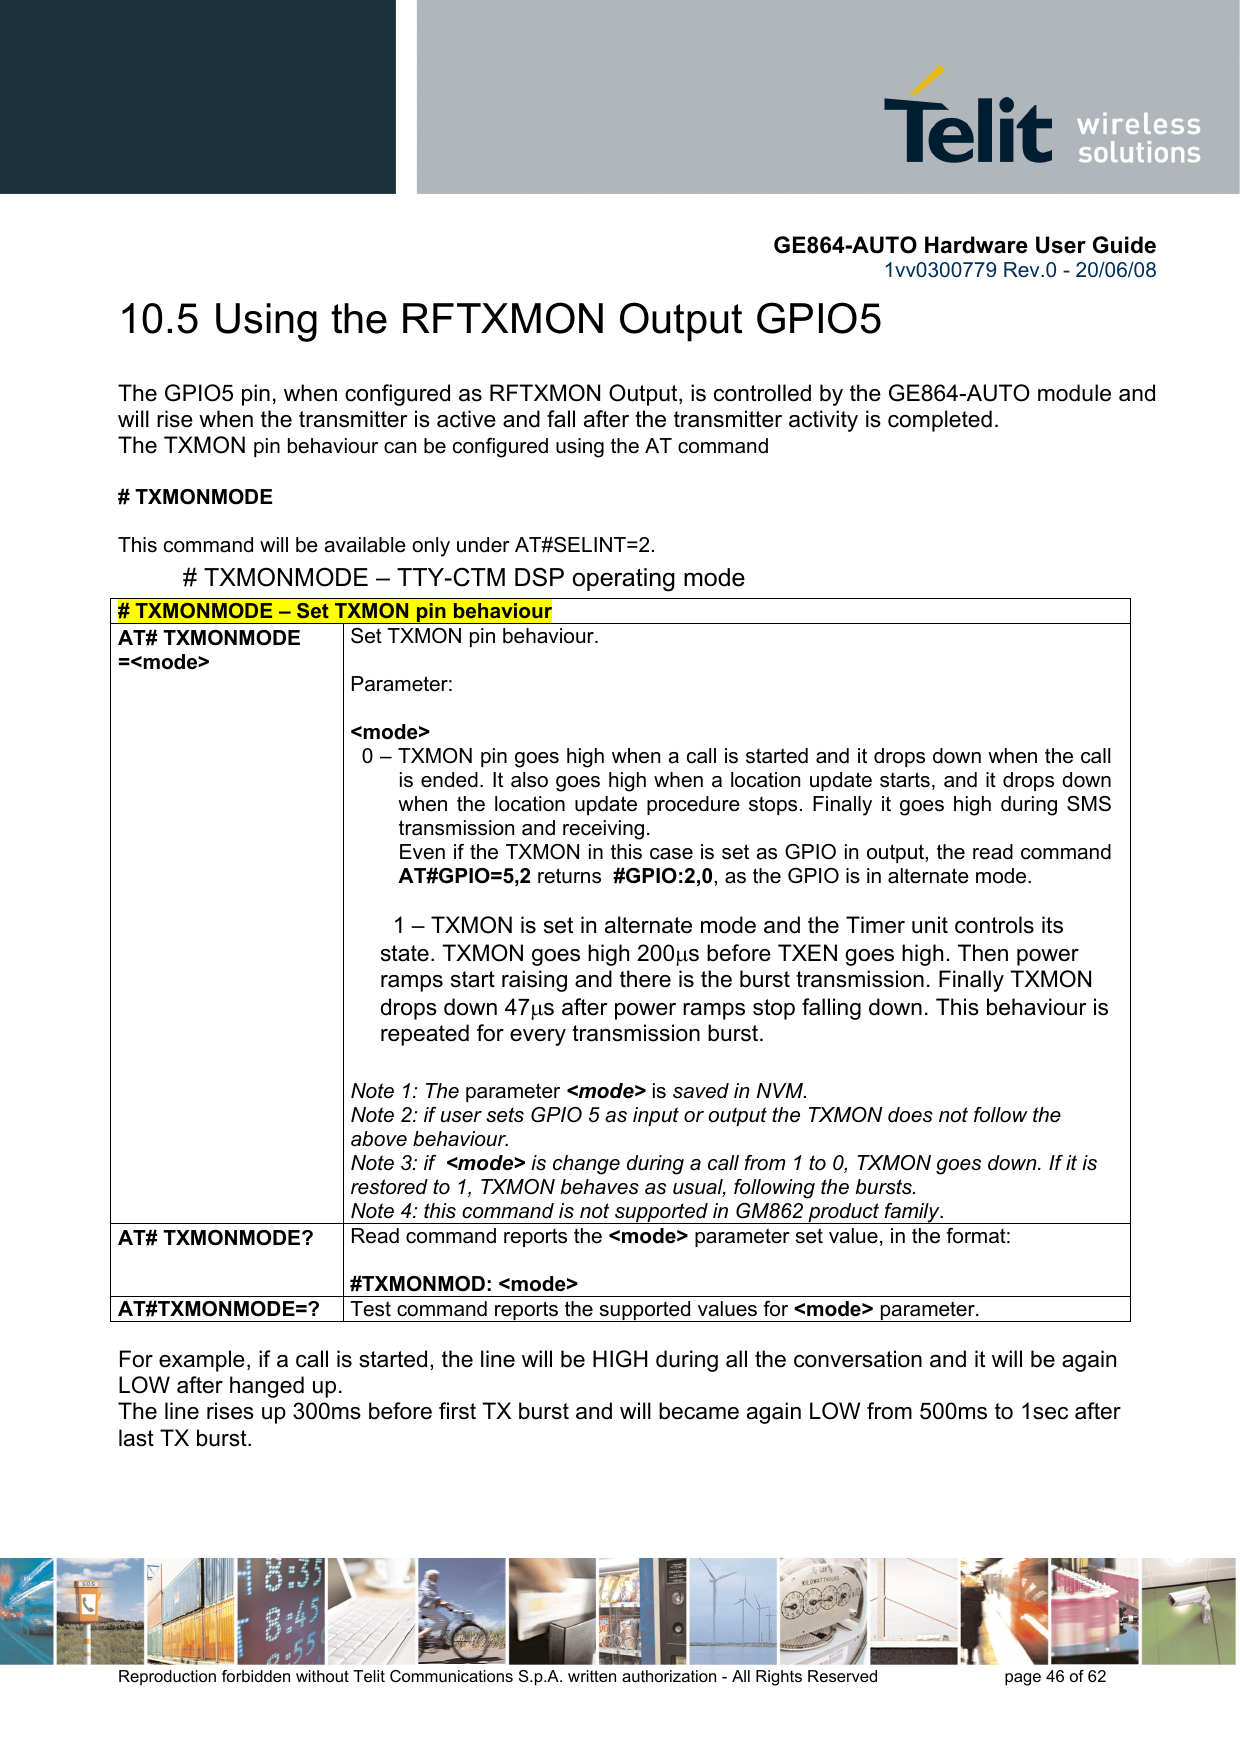       GE864-AUTO Hardware User Guide 1vv0300779 Rev.0 - 20/06/08      Reproduction forbidden without Telit Communications S.p.A. written authorization - All Rights Reserved    page 46 of 62  10.5  Using the RFTXMON Output GPIO5 The GPIO5 pin, when configured as RFTXMON Output, is controlled by the GE864-AUTO module and will rise when the transmitter is active and fall after the transmitter activity is completed. The TXMON pin behaviour can be configured using the AT command   # TXMONMODE   This command will be available only under AT#SELINT=2. # TXMONMODE – TTY-CTM DSP operating mode # TXMONMODE – Set TXMON pin behaviour  AT# TXMONMODE =&lt;mode&gt; Set TXMON pin behaviour.  Parameter:   &lt;mode&gt;   0 – TXMON pin goes high when a call is started and it drops down when the call is ended. It also goes high when a location update starts, and it drops down when the location update procedure stops. Finally it goes high during SMS transmission and receiving. Even if the TXMON in this case is set as GPIO in output, the read command AT#GPIO=5,2 returns  #GPIO:2,0, as the GPIO is in alternate mode.    1 – TXMON is set in alternate mode and the Timer unit controls its state. TXMON goes high 200μs before TXEN goes high. Then power ramps start raising and there is the burst transmission. Finally TXMON drops down 47μs after power ramps stop falling down. This behaviour is repeated for every transmission burst.   Note 1: The parameter &lt;mode&gt; is saved in NVM.  Note 2: if user sets GPIO 5 as input or output the TXMON does not follow the above behaviour. Note 3: if  &lt;mode&gt; is change during a call from 1 to 0, TXMON goes down. If it is restored to 1, TXMON behaves as usual, following the bursts. Note 4: this command is not supported in GM862 product family. AT# TXMONMODE?  Read command reports the &lt;mode&gt; parameter set value, in the format:   #TXMONMOD: &lt;mode&gt; AT#TXMONMODE=?  Test command reports the supported values for &lt;mode&gt; parameter.  For example, if a call is started, the line will be HIGH during all the conversation and it will be again LOW after hanged up. The line rises up 300ms before first TX burst and will became again LOW from 500ms to 1sec after last TX burst. 